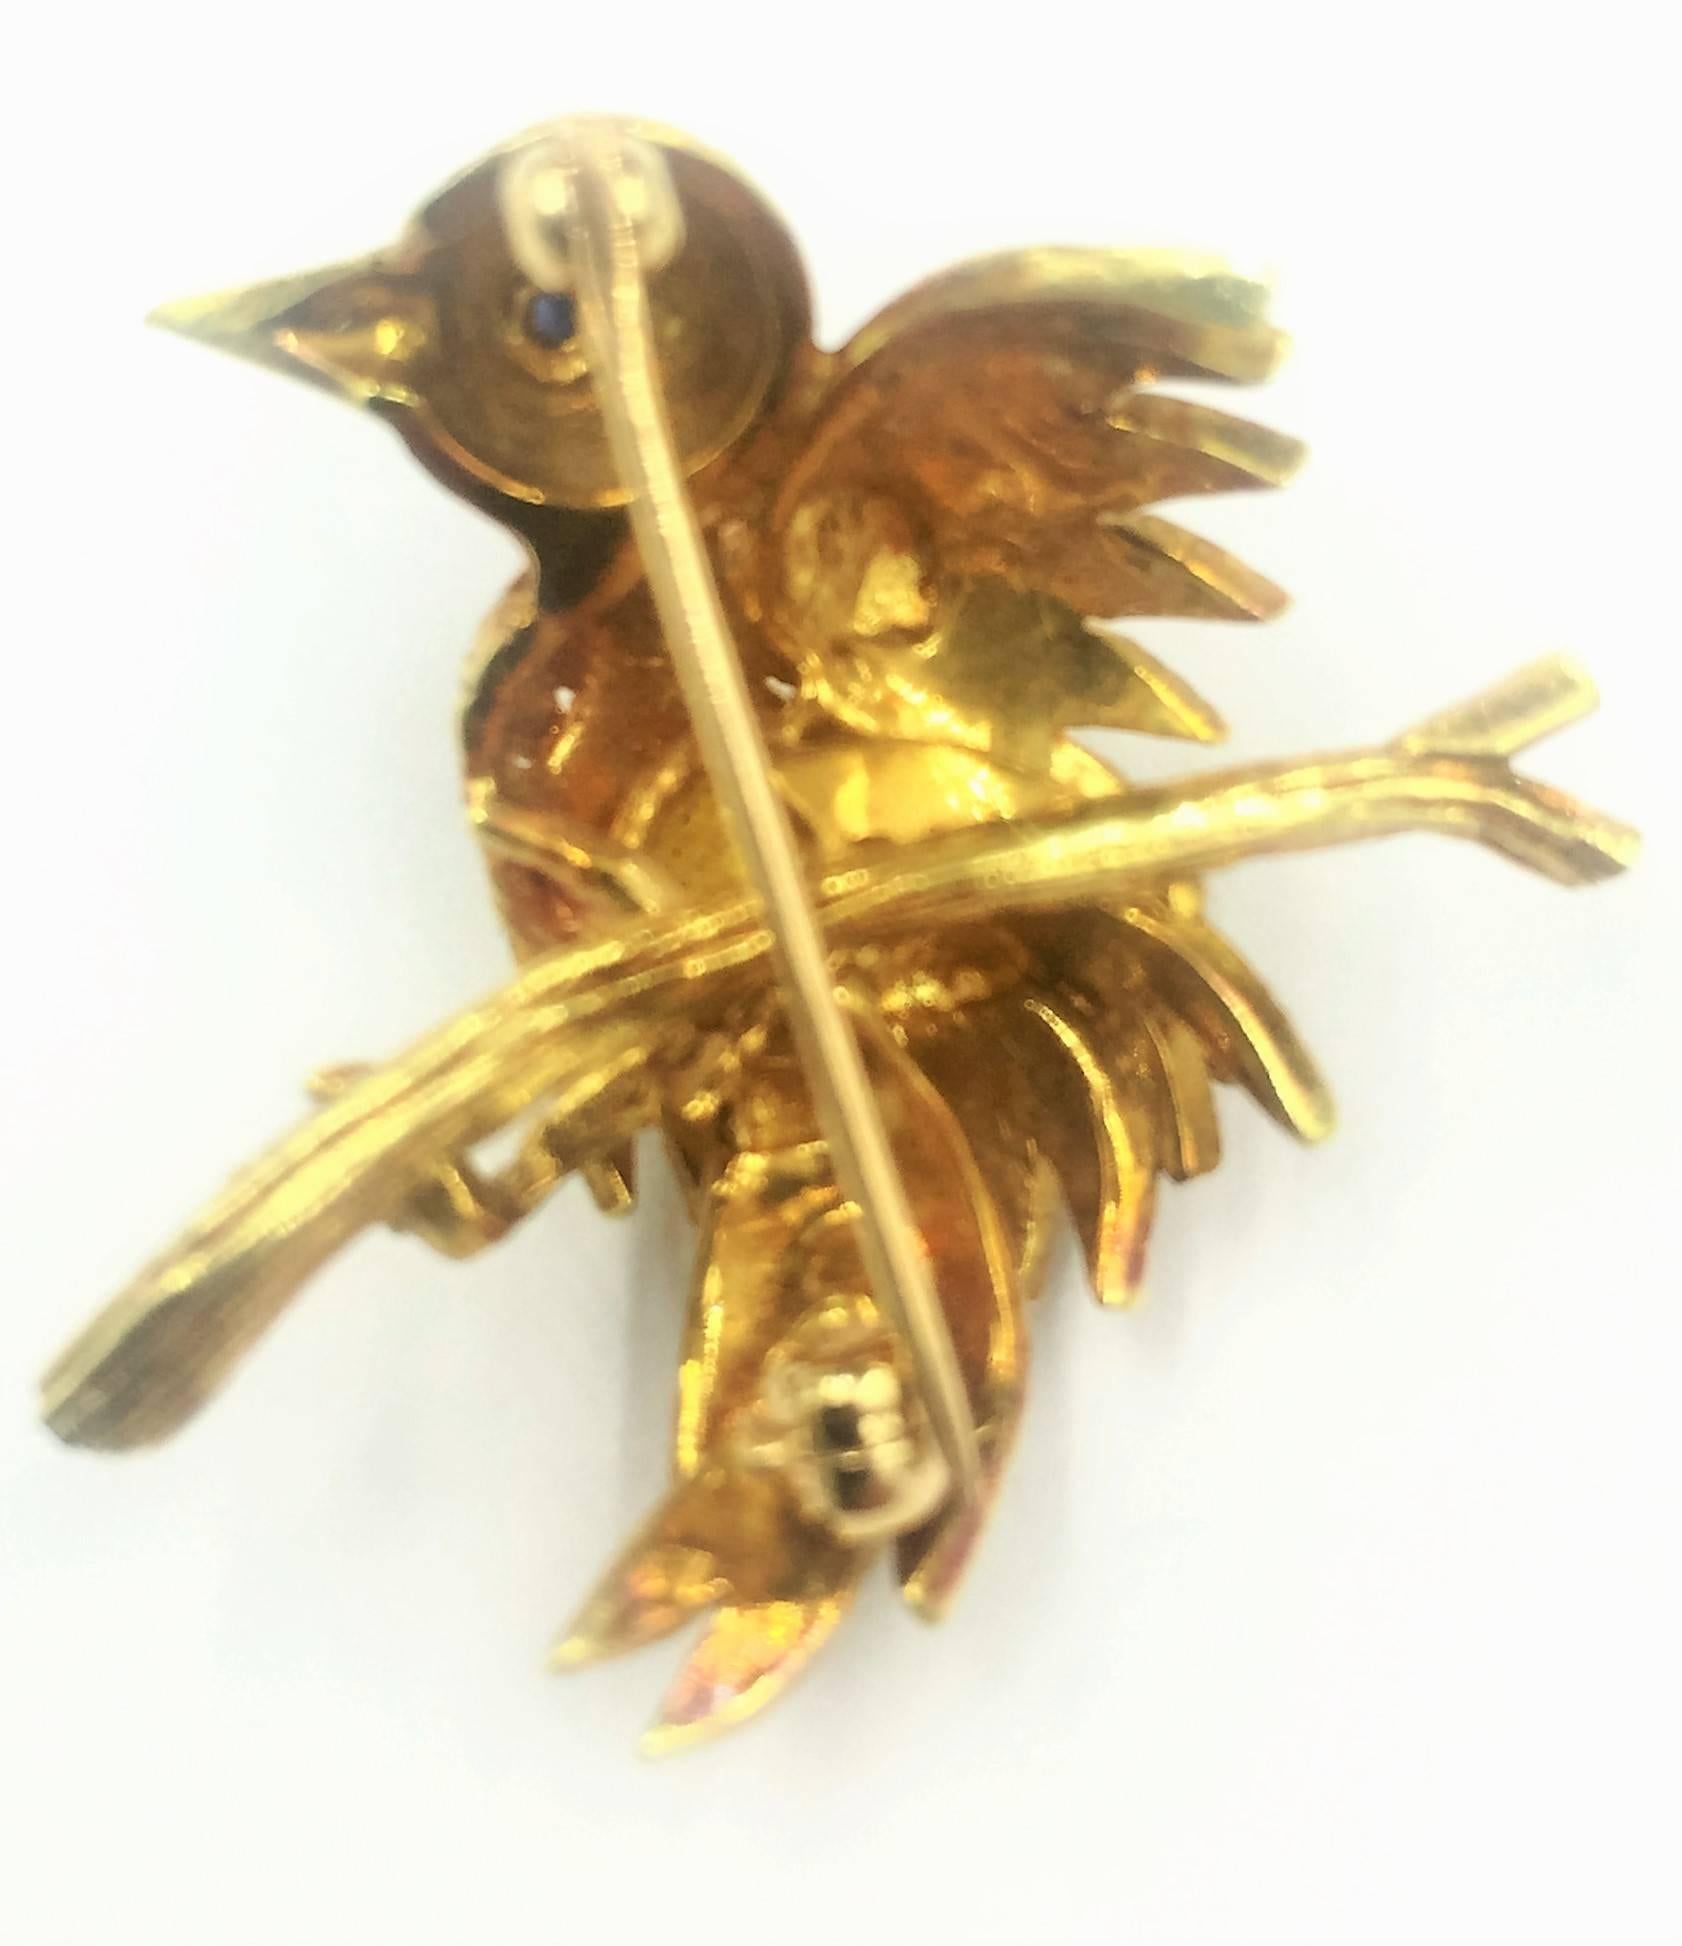 Lovable in every way this Vintage 18kt Gold and Sapphire Bird on Perch Pin Brooch features a .05 carat blue sapphire as the eye and a painstakingly textured finish for the feathers and perch. The perfect gift for the bird lover or Tiffany & Co.